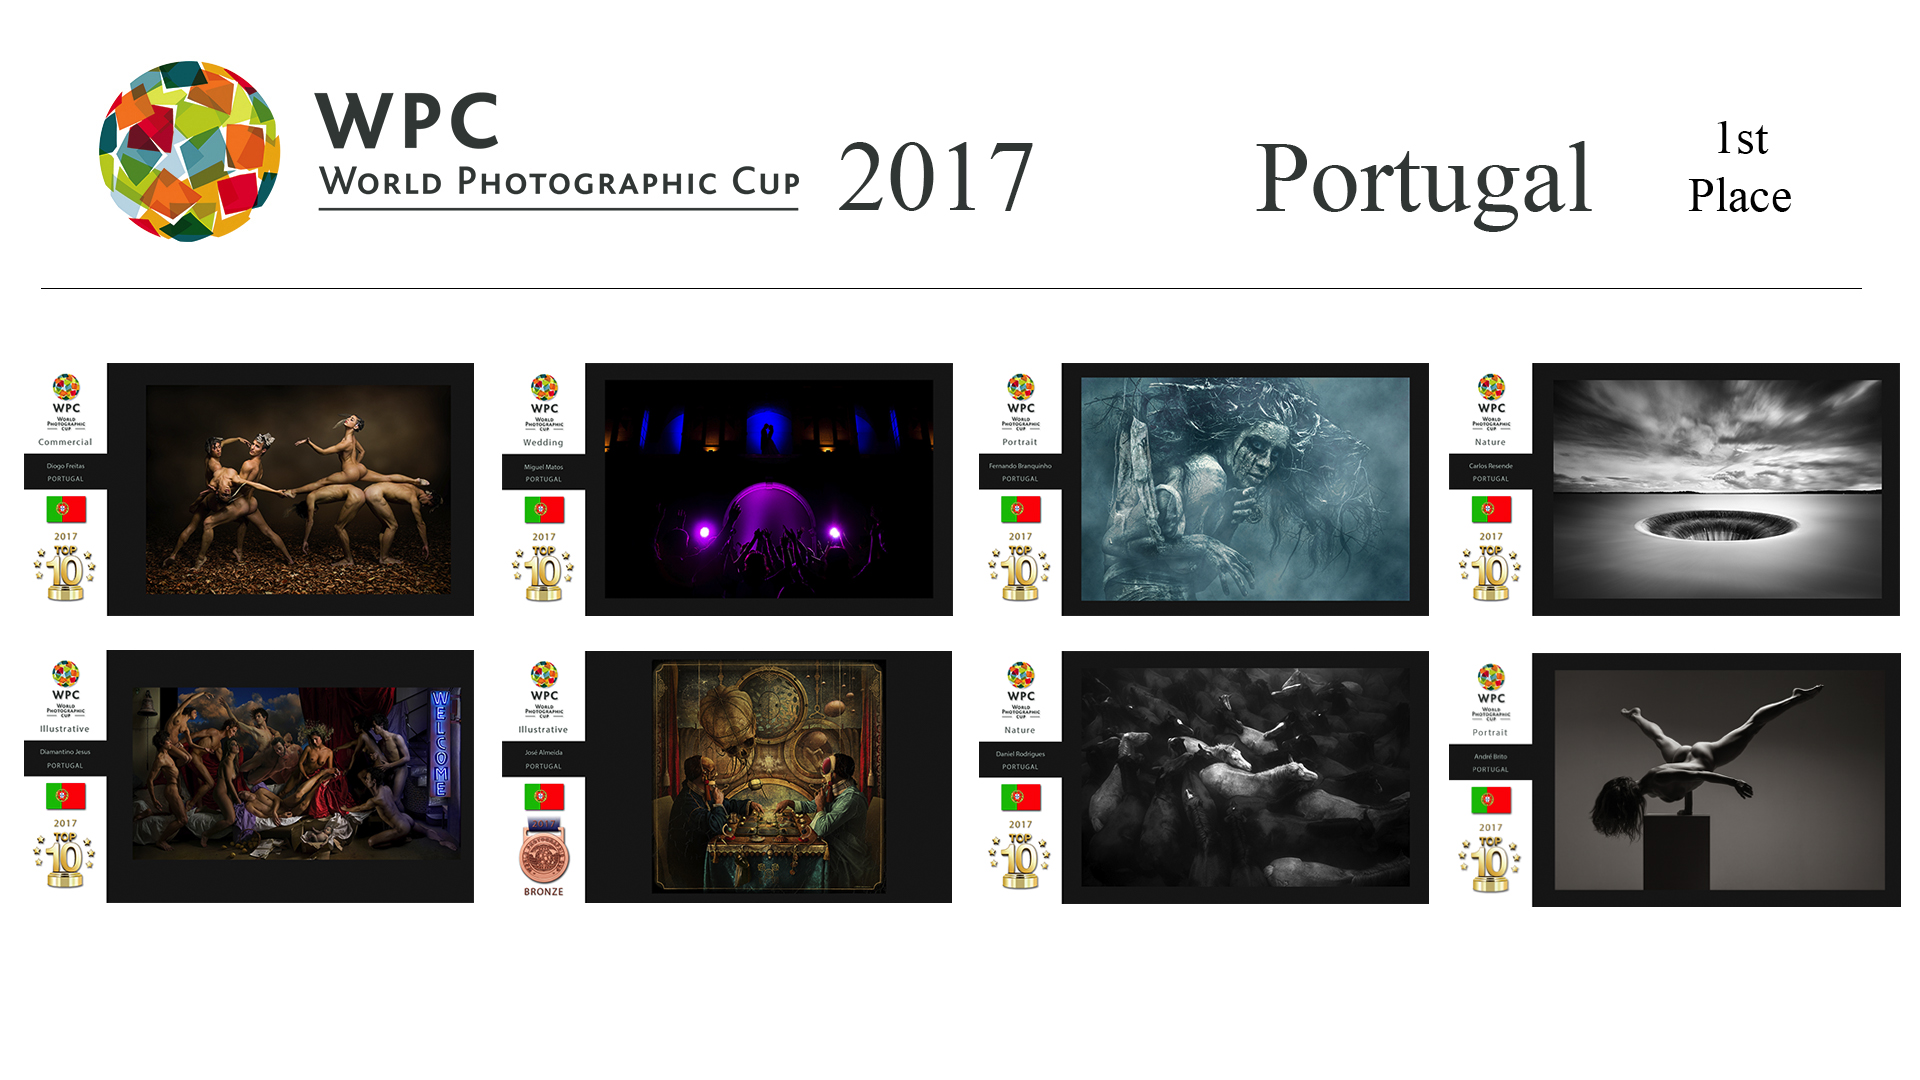 Team 1st place-Portugal